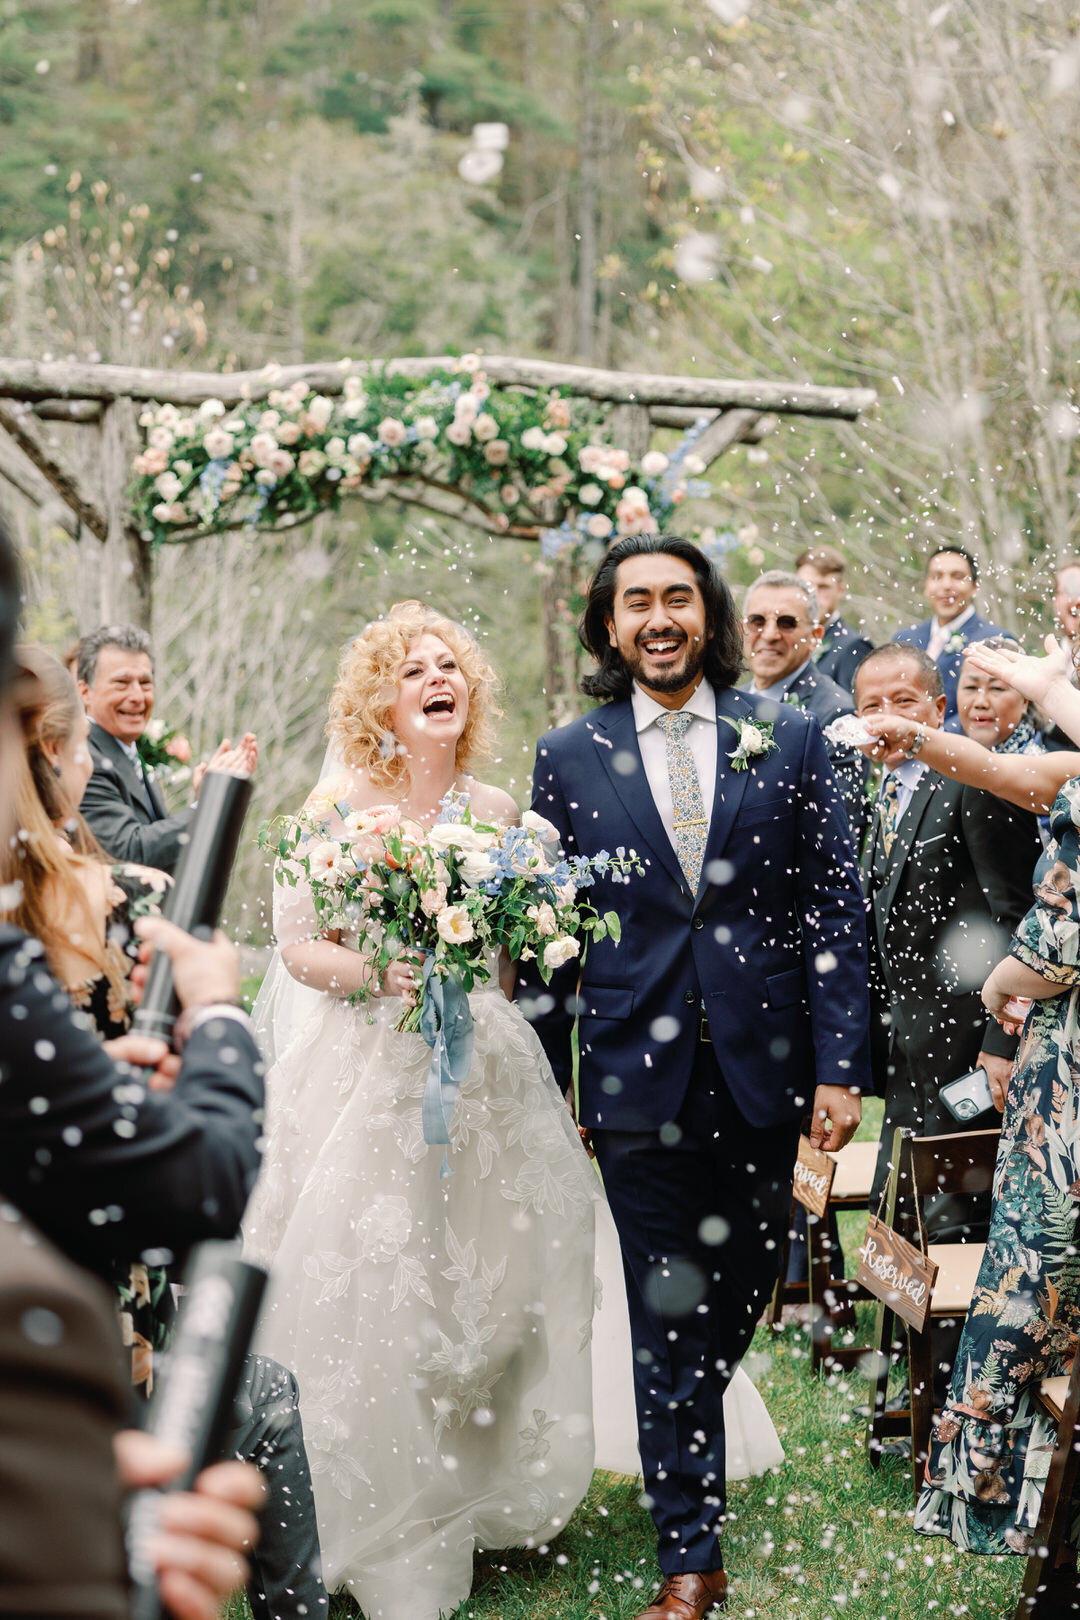 Bride and Groom laughing and  Exiting Ceremony while guests throw confetti